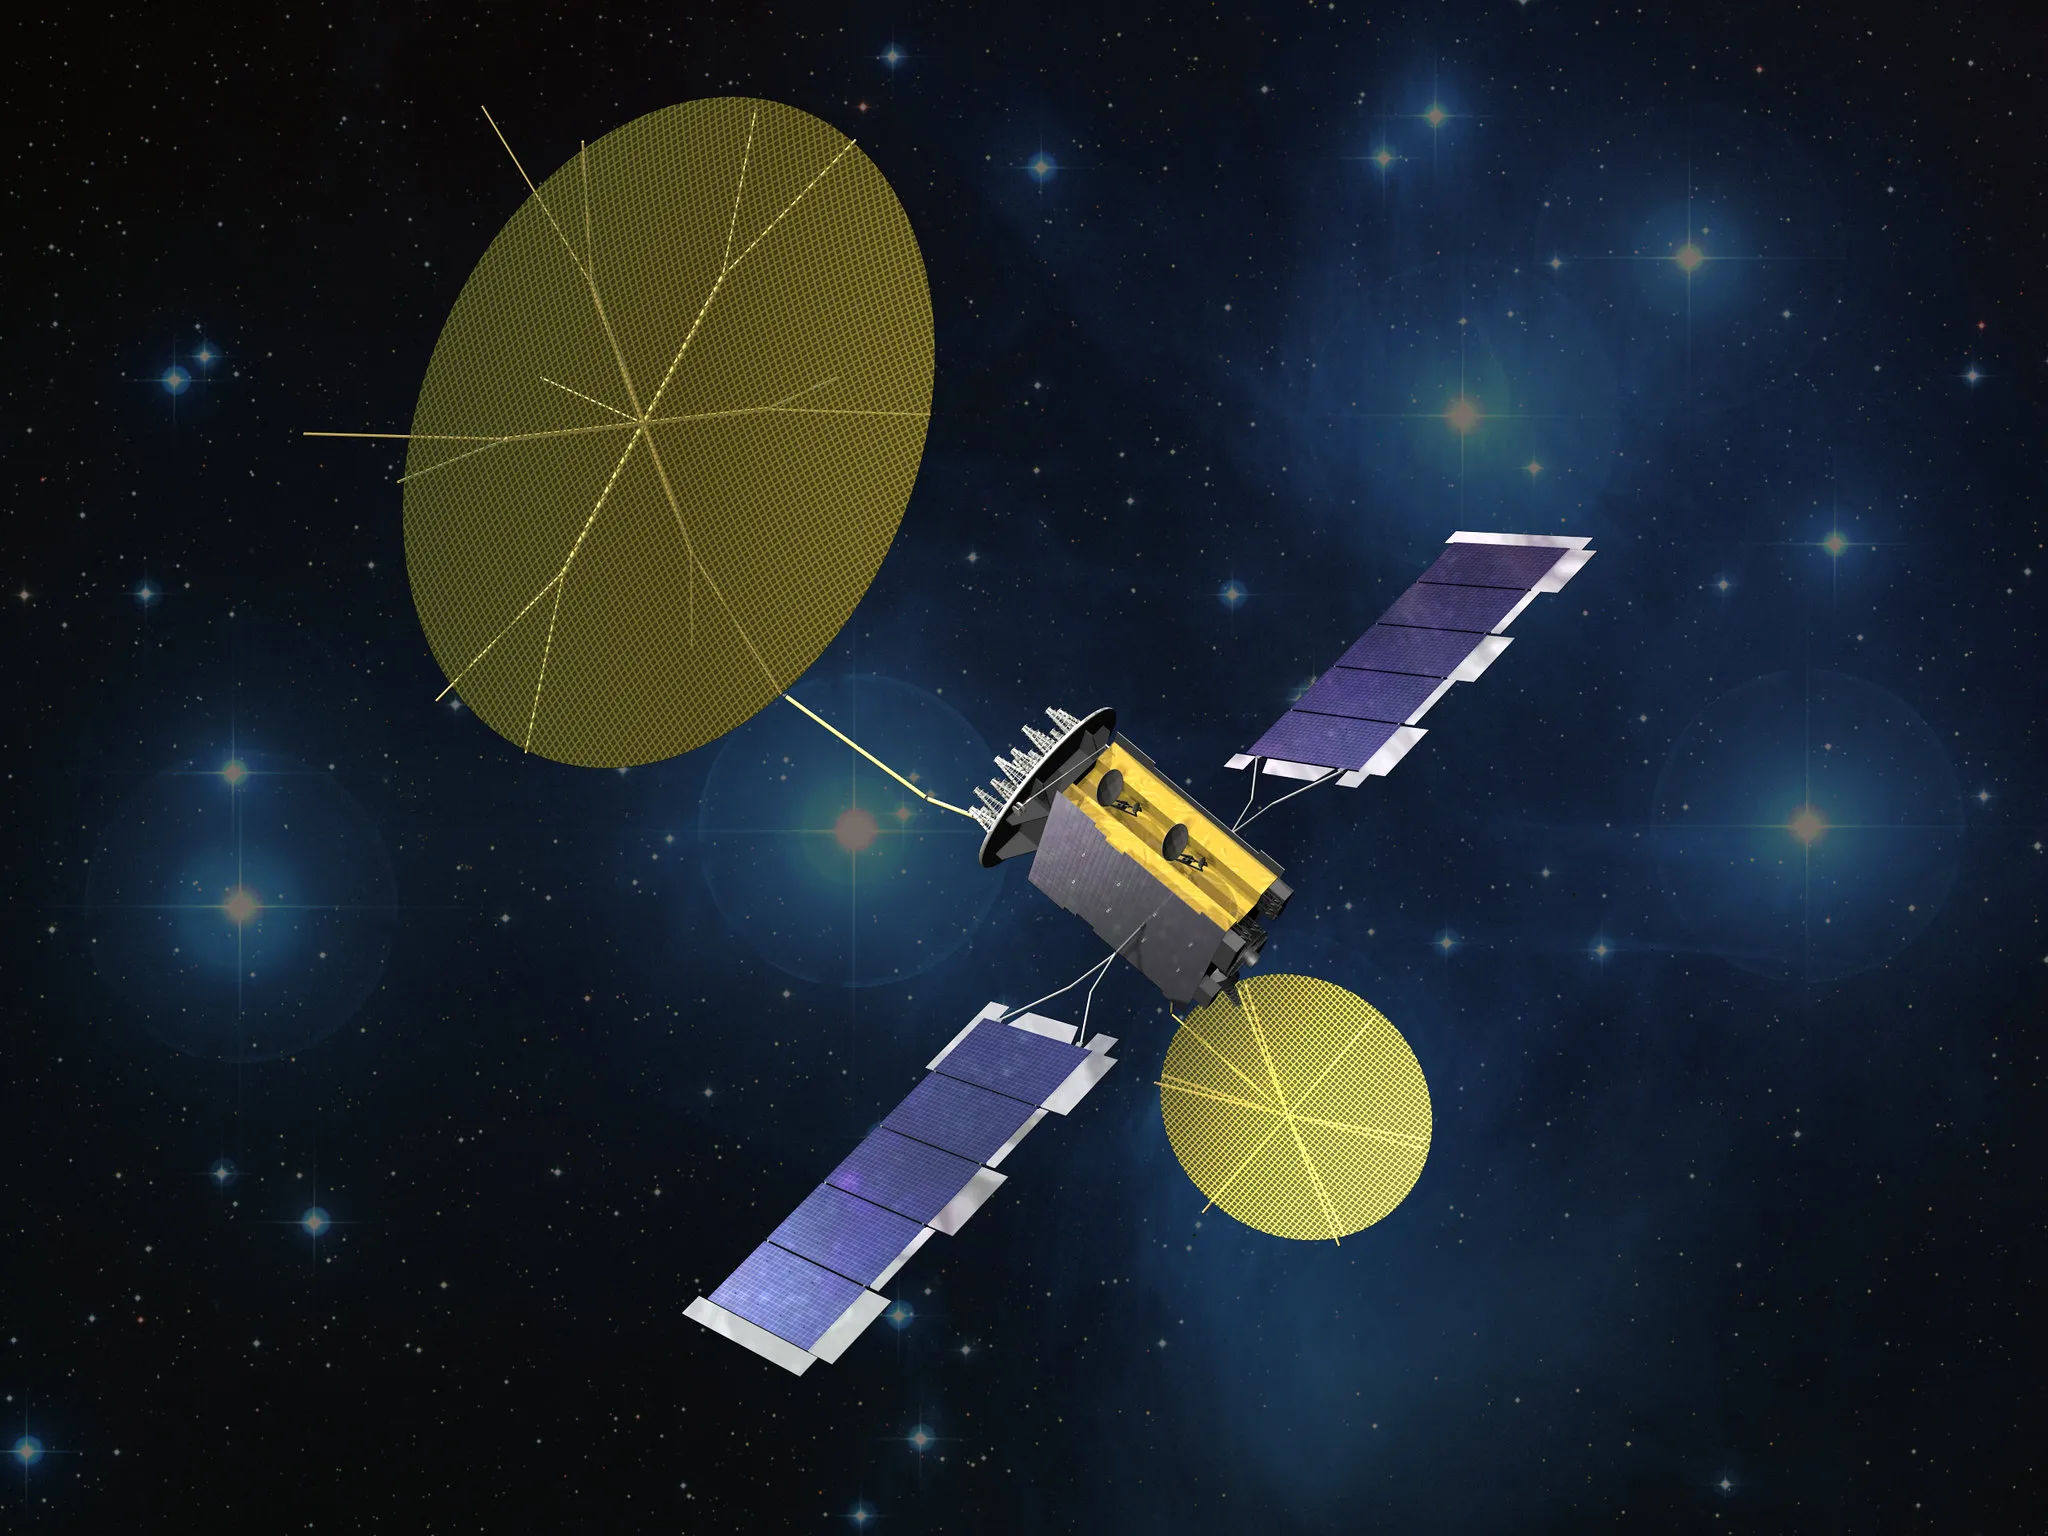 Space Force Looks to MEO for Narrowband SATCOM